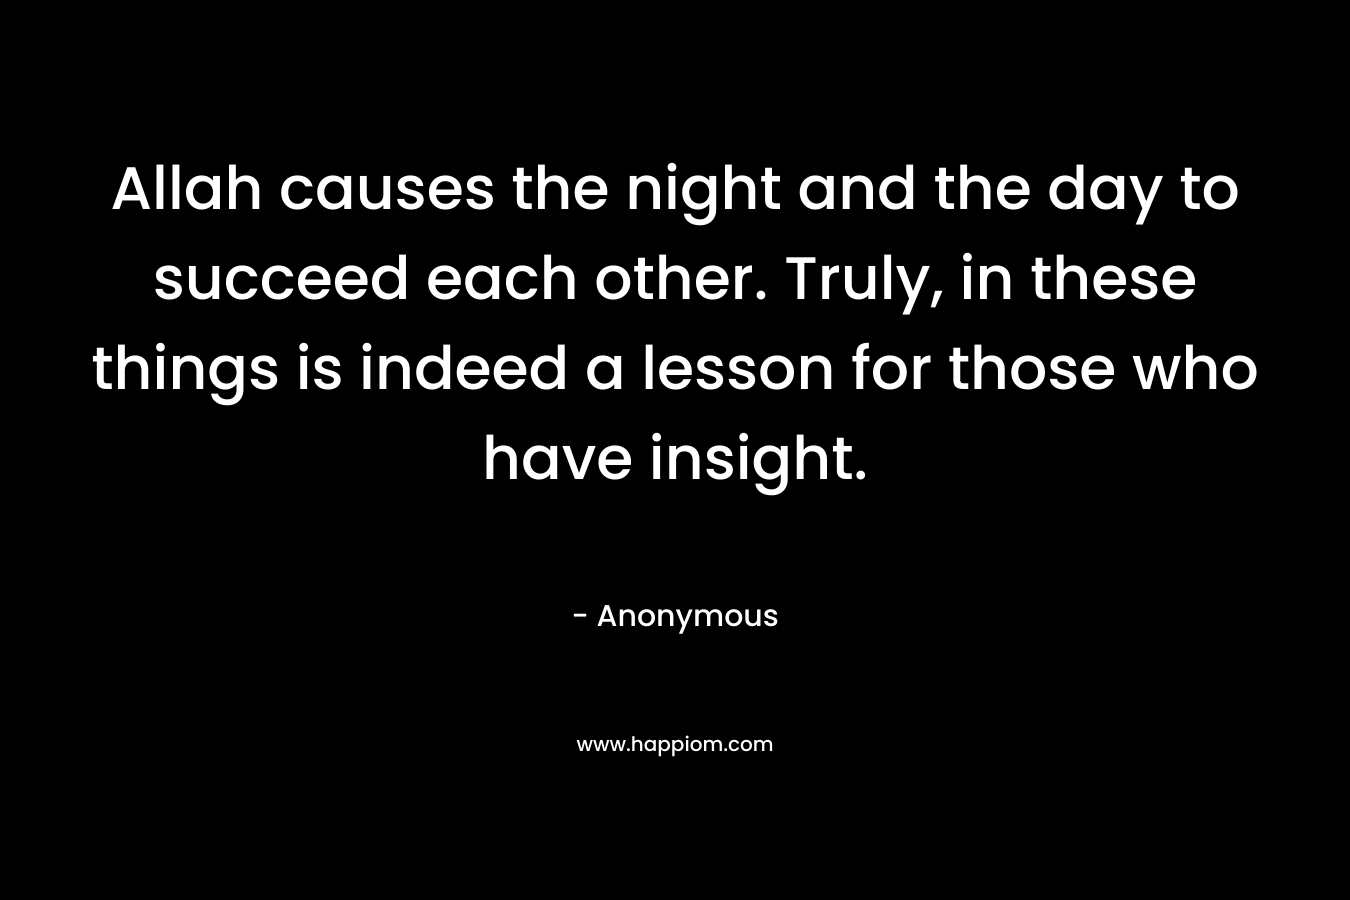 Allah causes the night and the day to succeed each other. Truly, in these things is indeed a lesson for those who have insight. – Anonymous